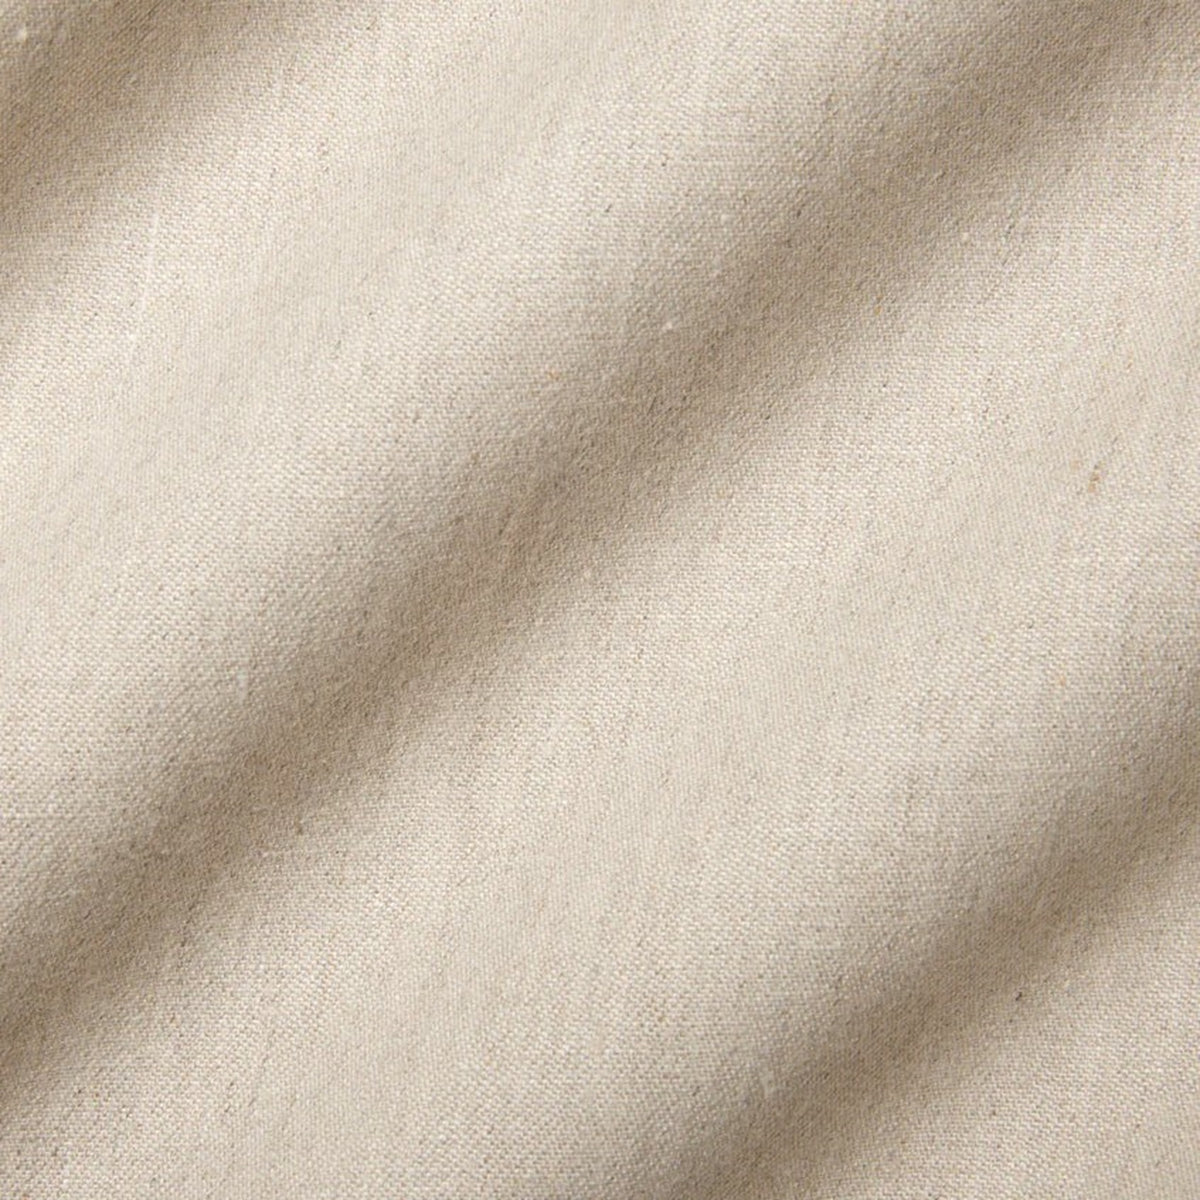 Swatch Sample of Sferra Cucina Apron in Natural Color